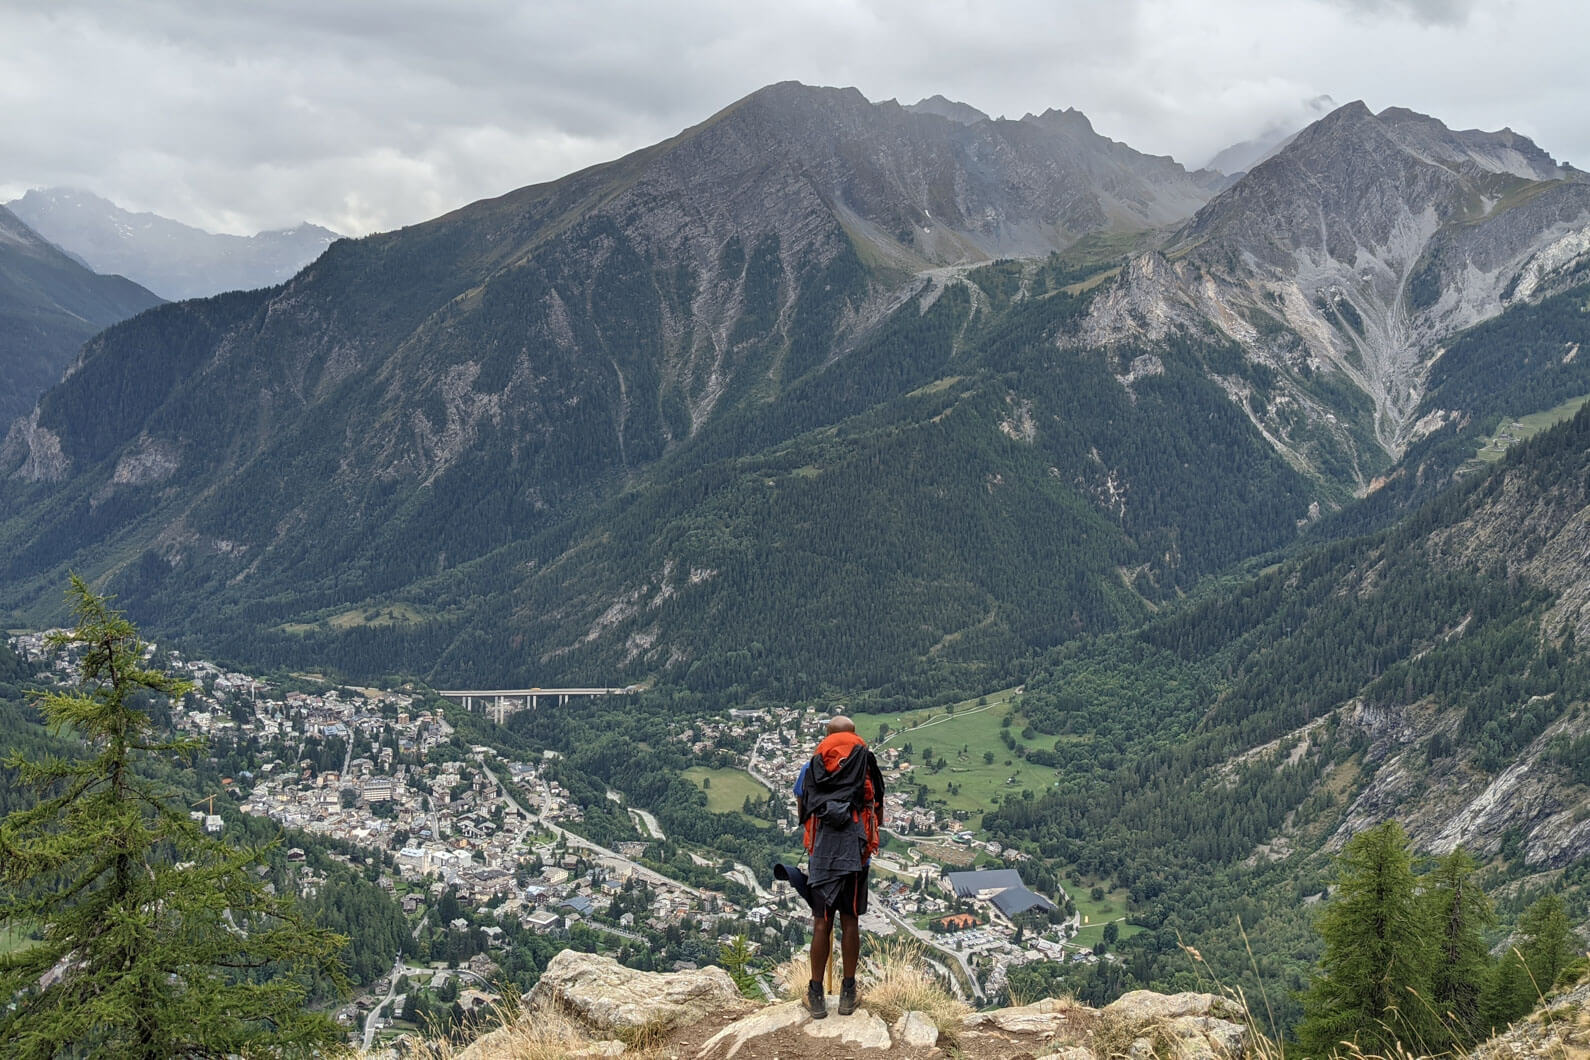 A Guide to Hiking the Tour du Mont Blanc